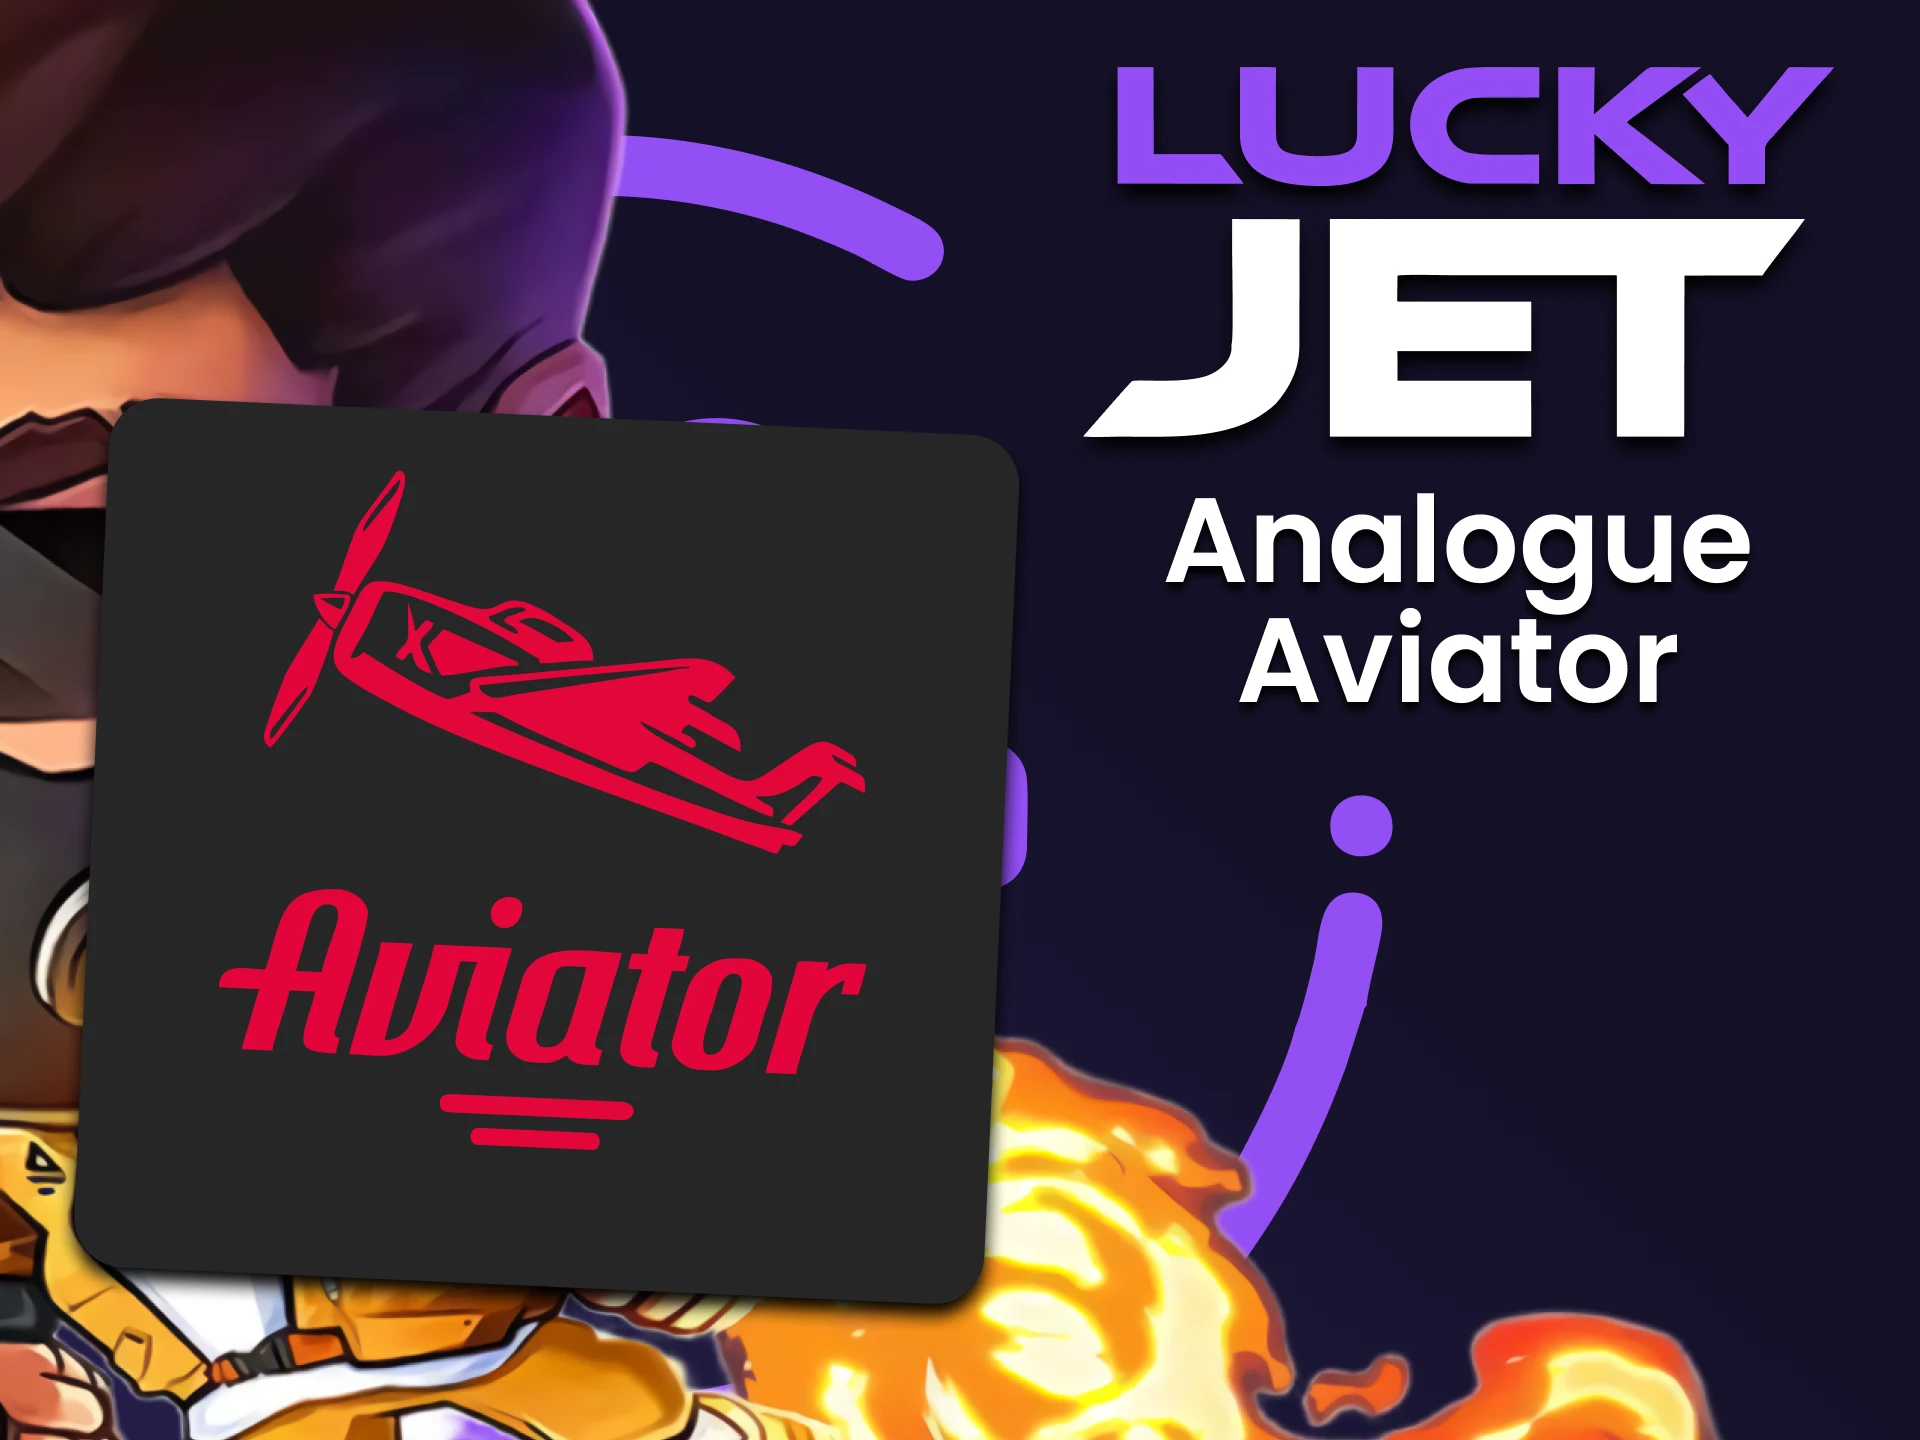 Aviator and Lucky Jet games are very similar to each other.